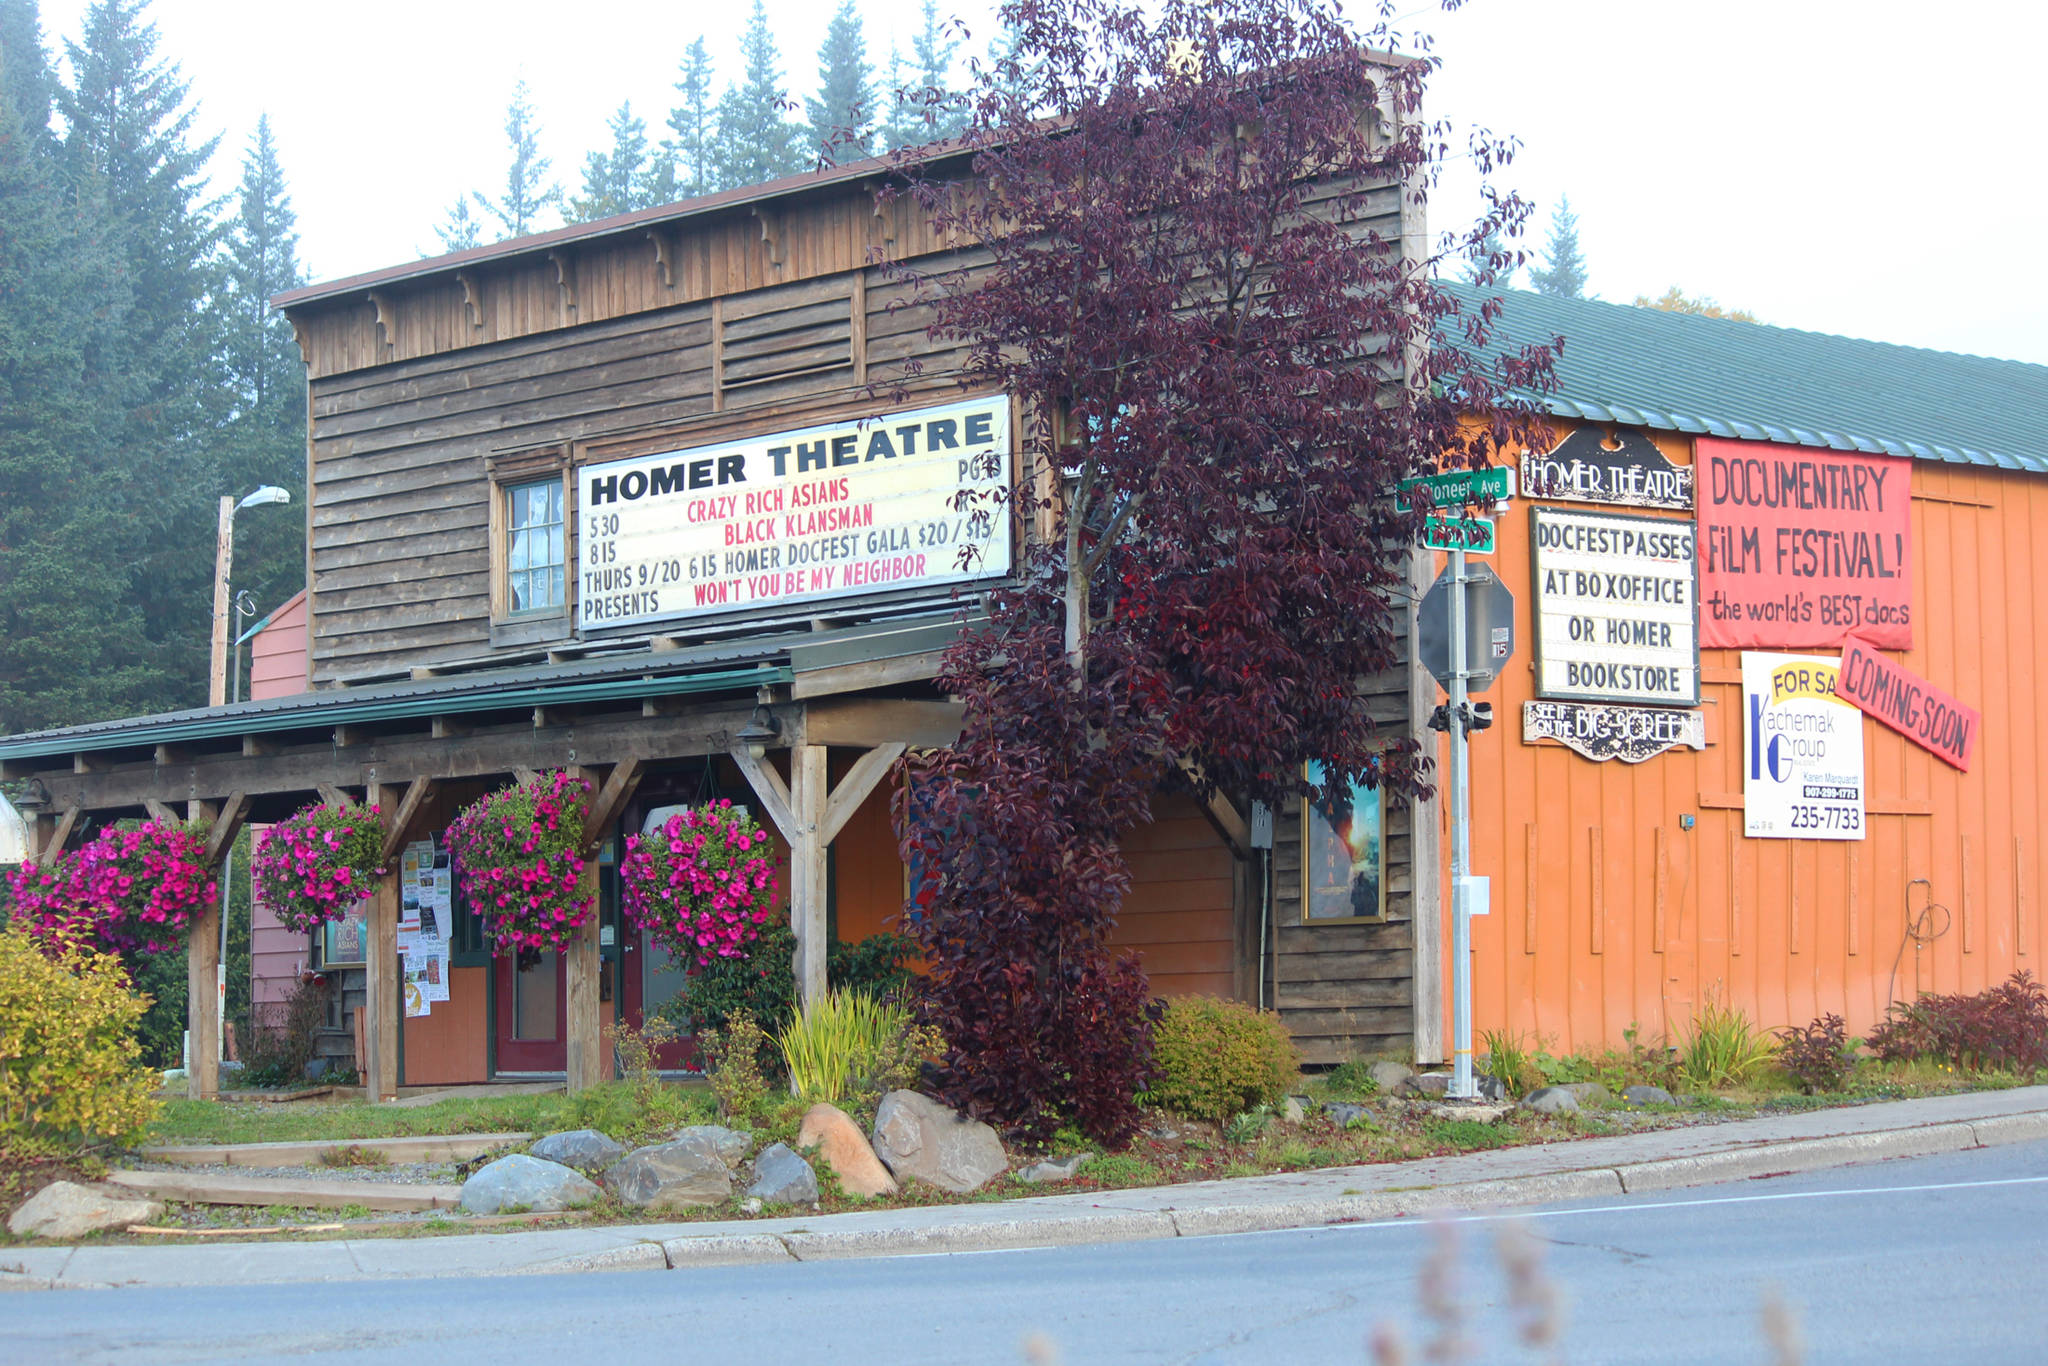 A sign advertising the annual Homer Documentary Film Festival hangs on the side of the Homer Theatre Wednesday, Sept. 19, 2018 in Homer, Alaska. (Photo by Megan Pacer/Homer News)